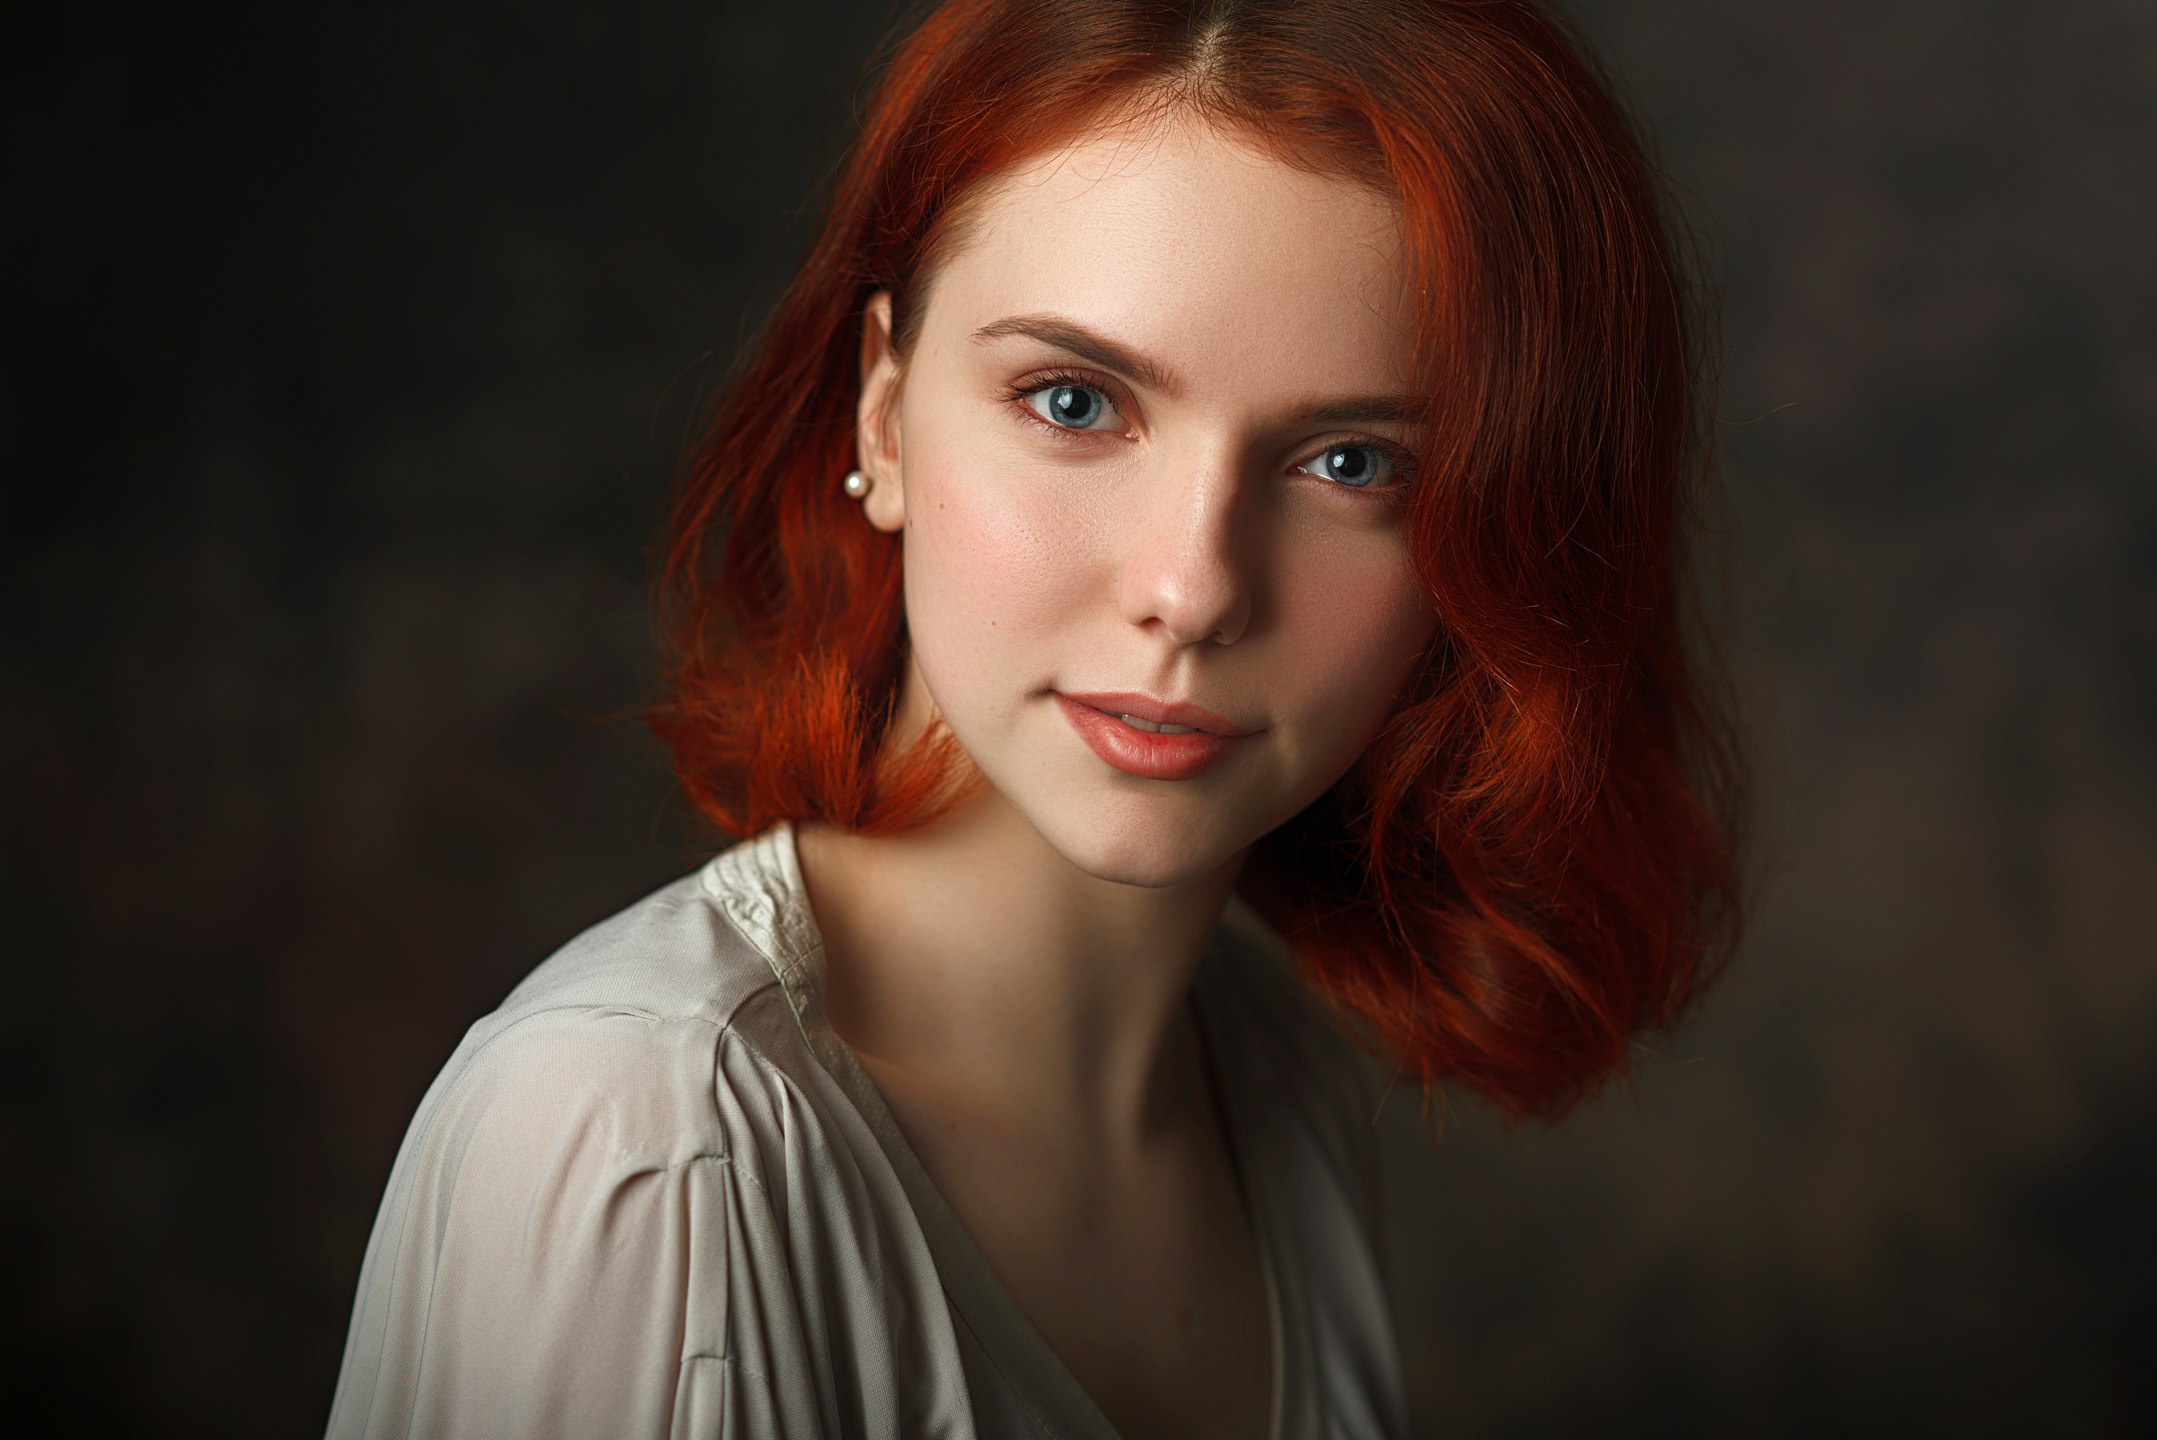 Model Depth Of Field Women Redhead Groomed Eyebrows Thick Eyebrows White Shirt Shirt Parted Lips Blu 2157x1440